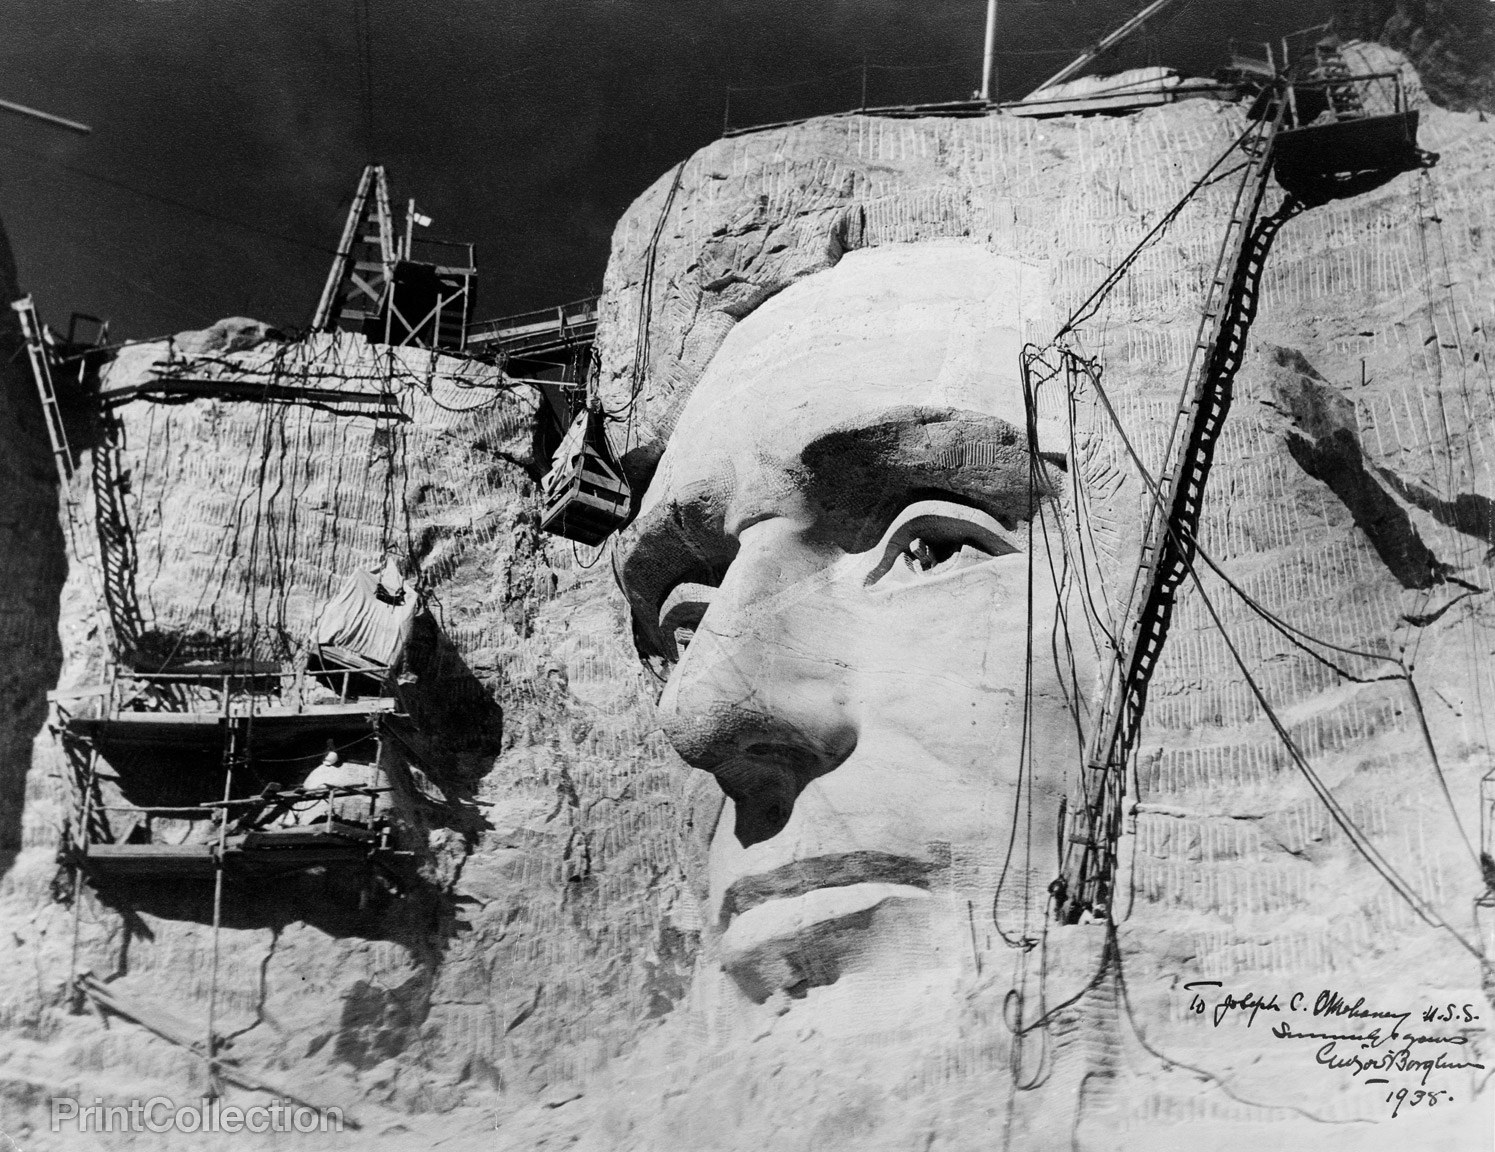 Mount Rushmore: See Photos Of Monument Under Construction, 51% OFF